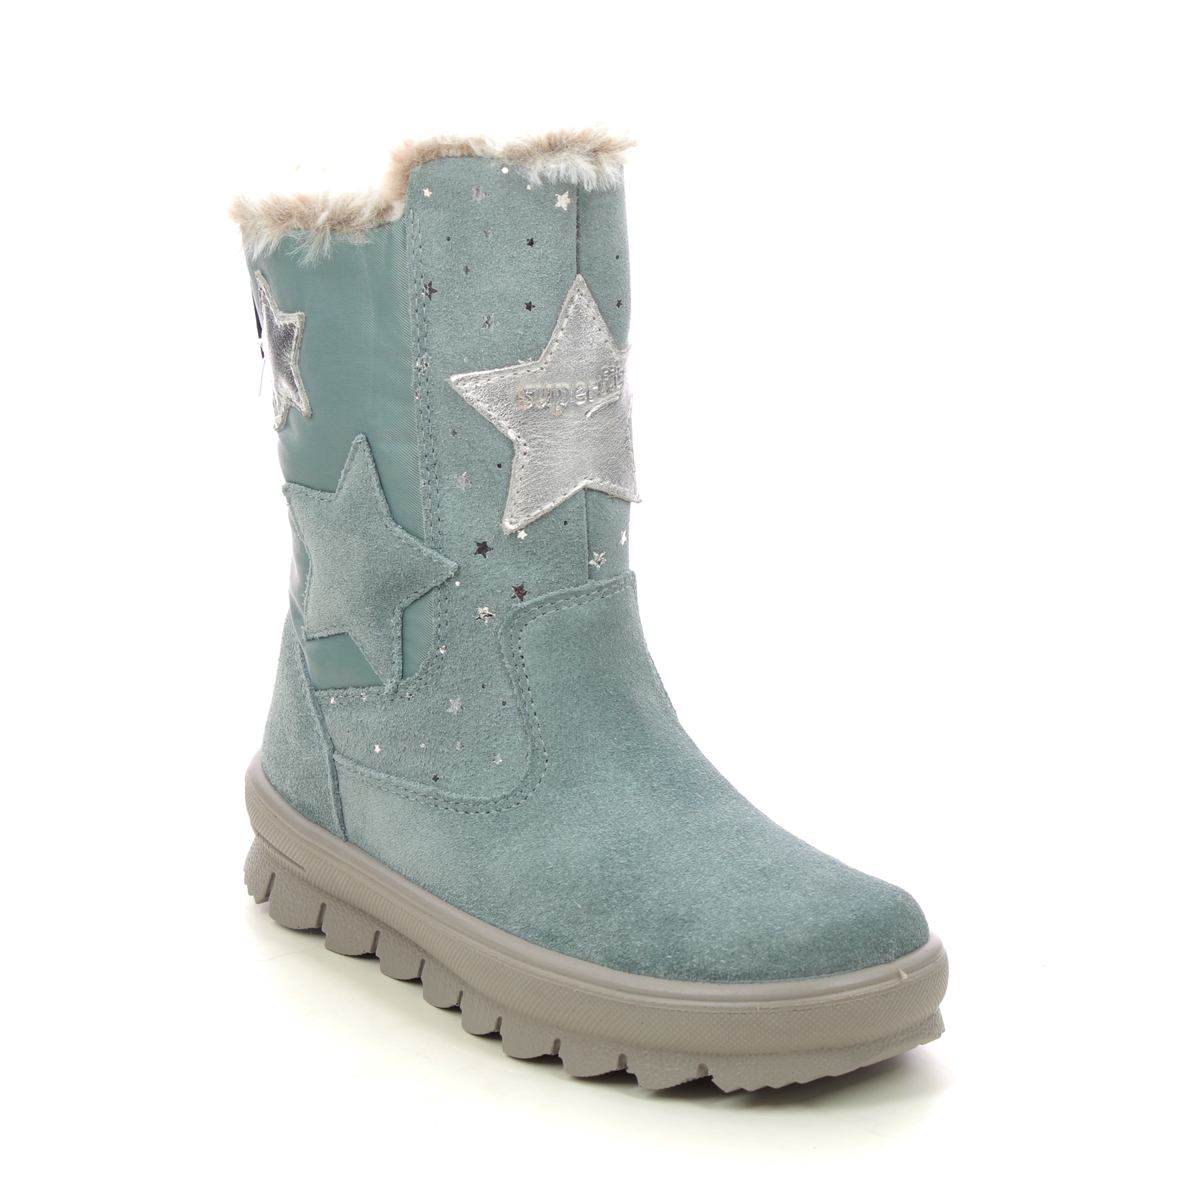 Superfit Flavia Star Gtx Blue Suede Kids Girls Boots 1000219-7500 In Size 28 In Plain Blue Suede For kids